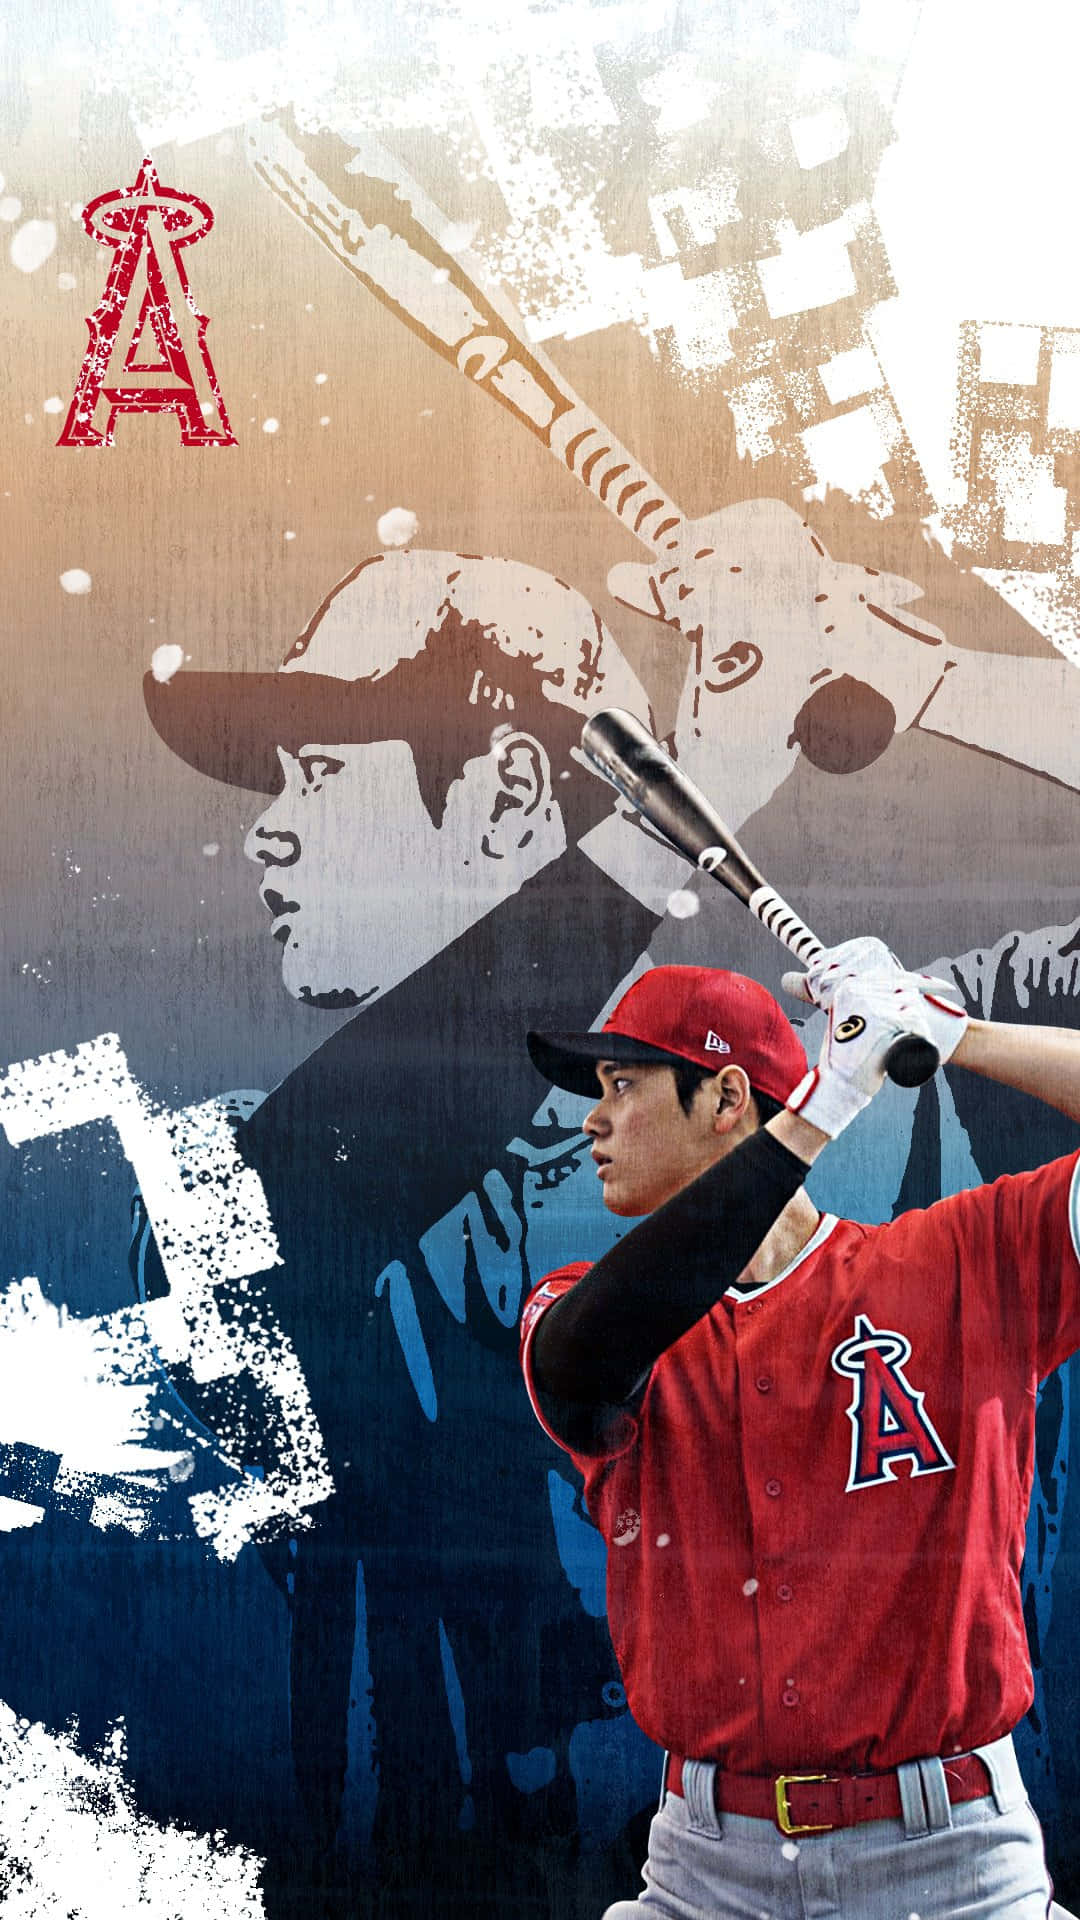 Exciting moments from the MLB Baseball League Wallpaper